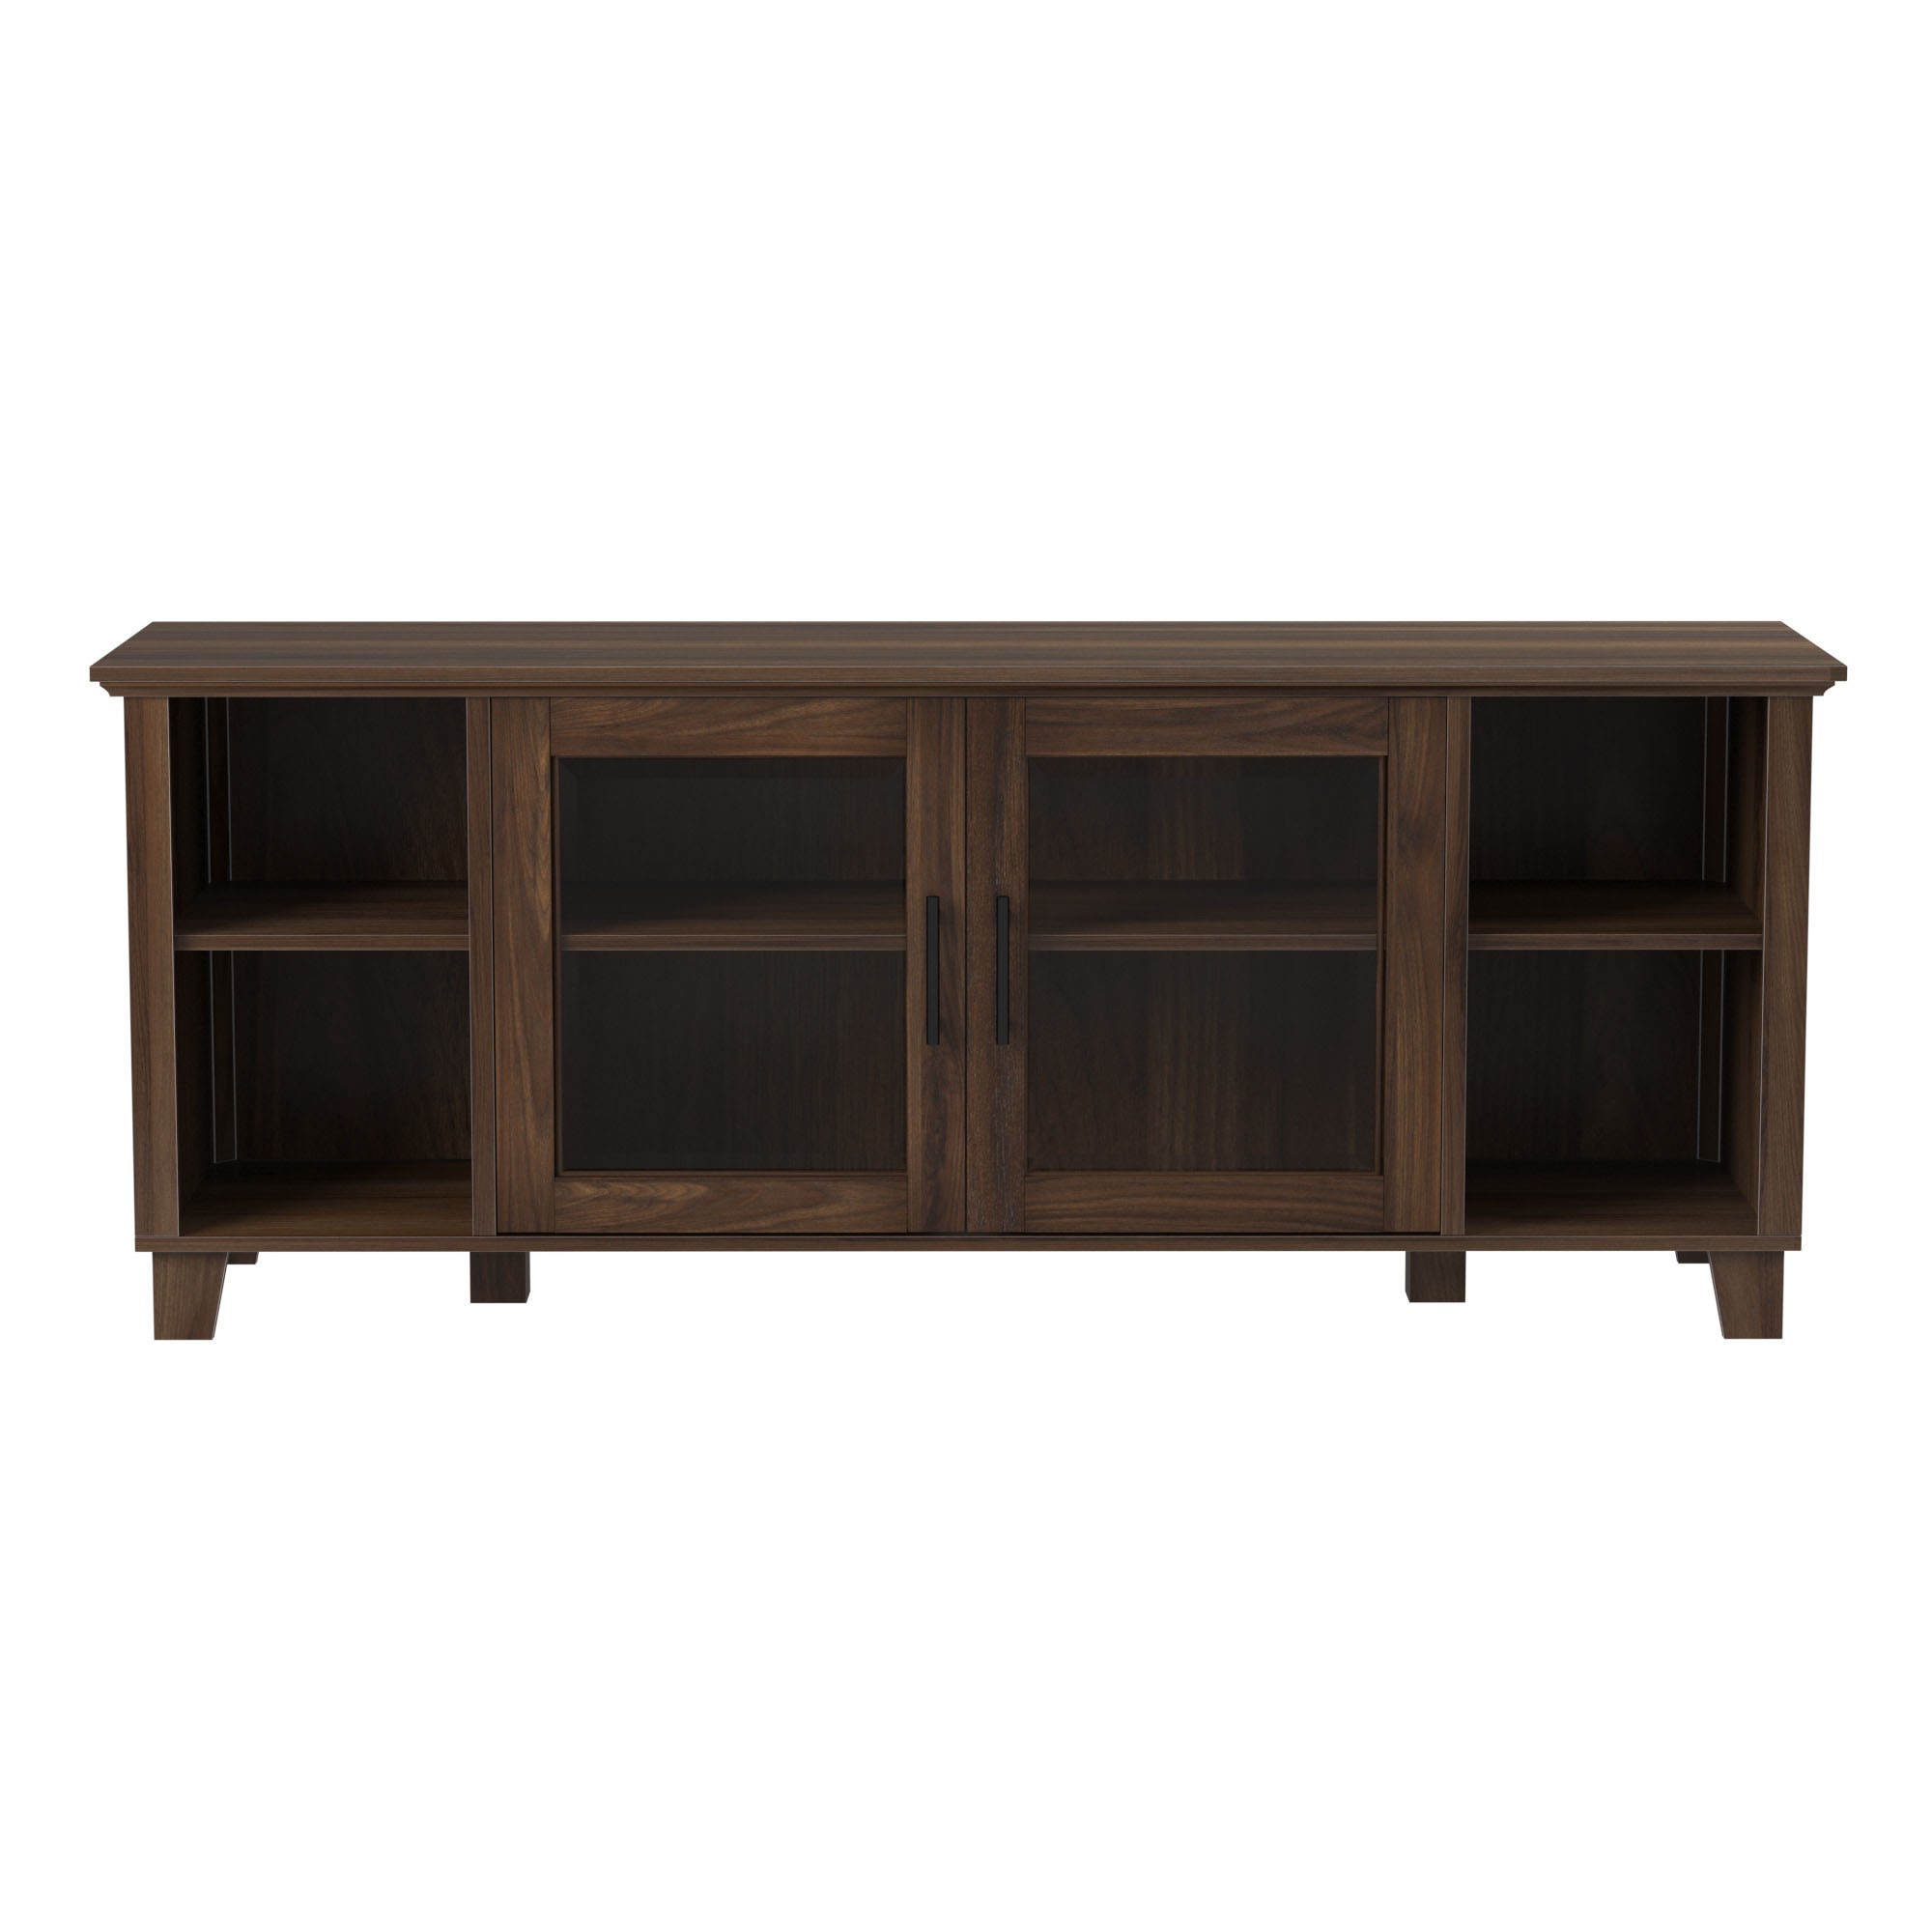 Columbus 58" TV Stand with Middle Doors - Dark Walnut - Image 1